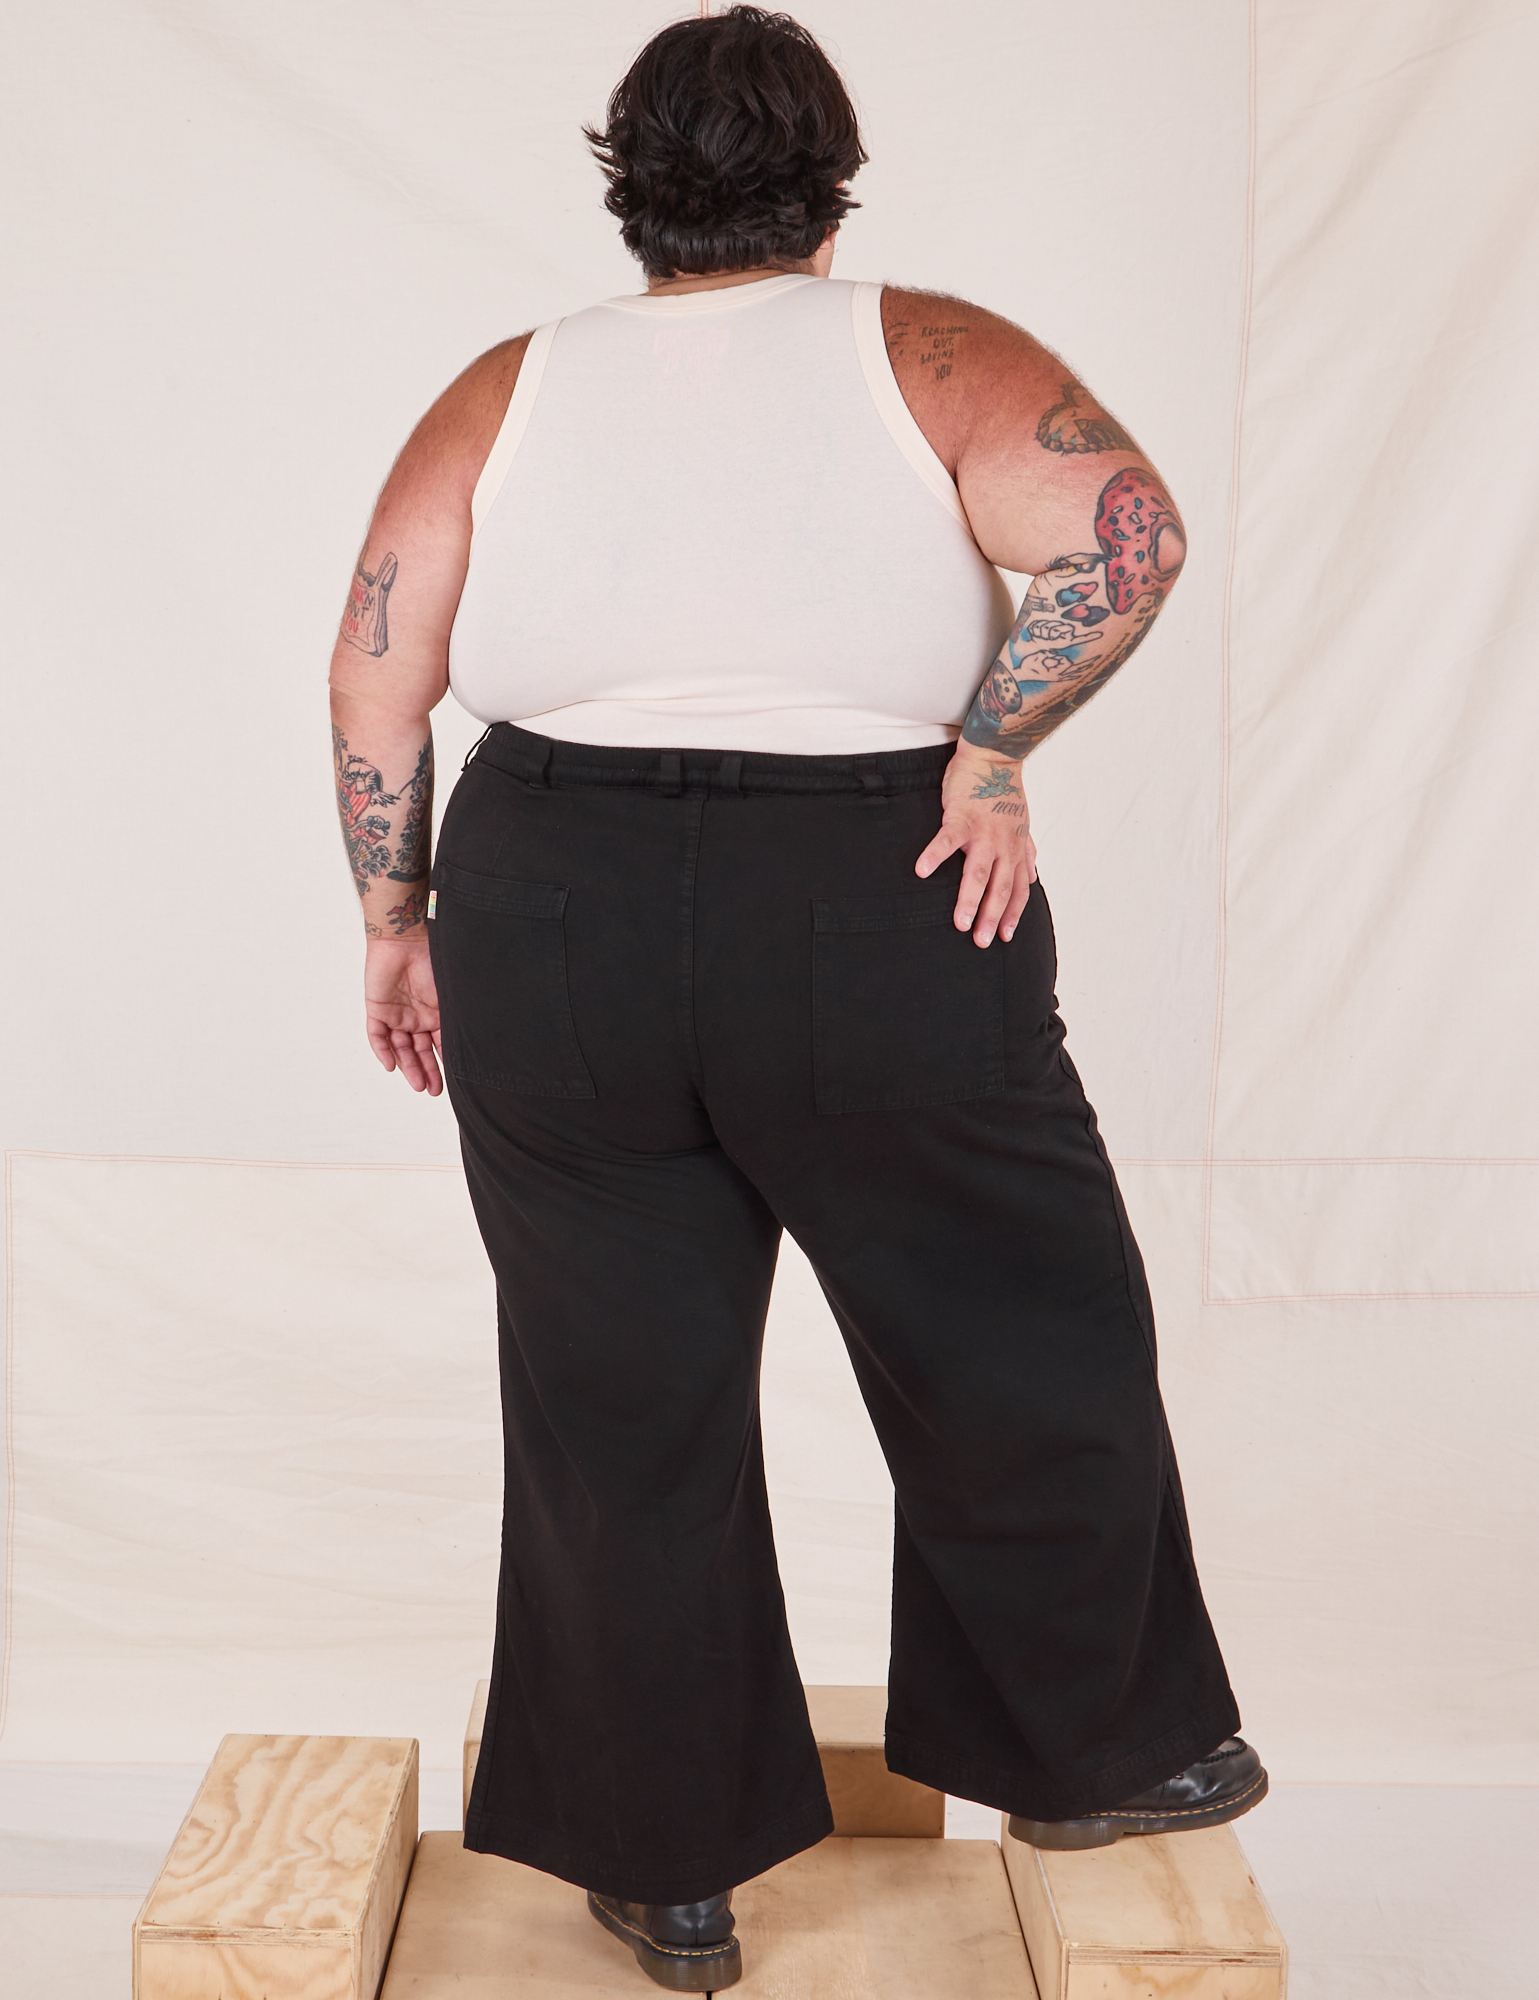 Back view of Bell Bottoms in Basic Black and vintage off-white Tank Top on Sam